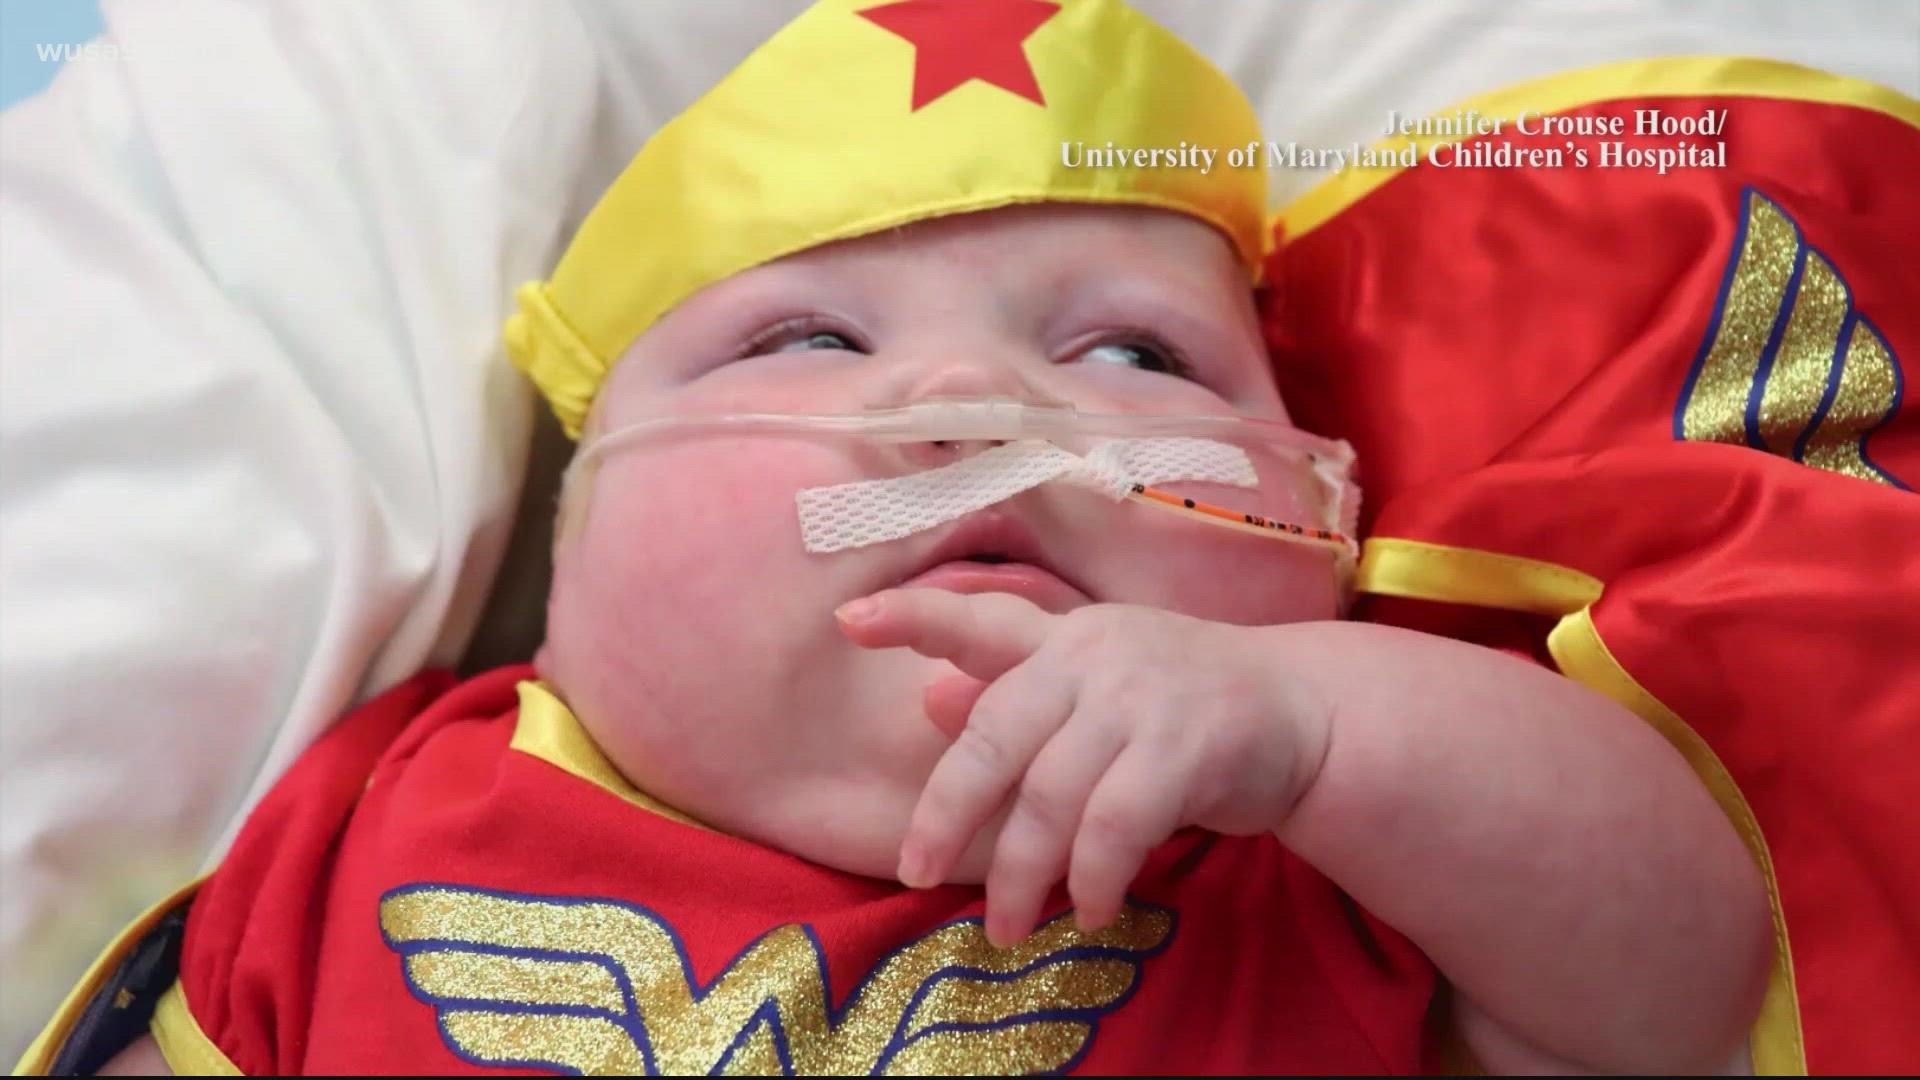 Some of the hospital's littlest patients got in the Halloween spirit.